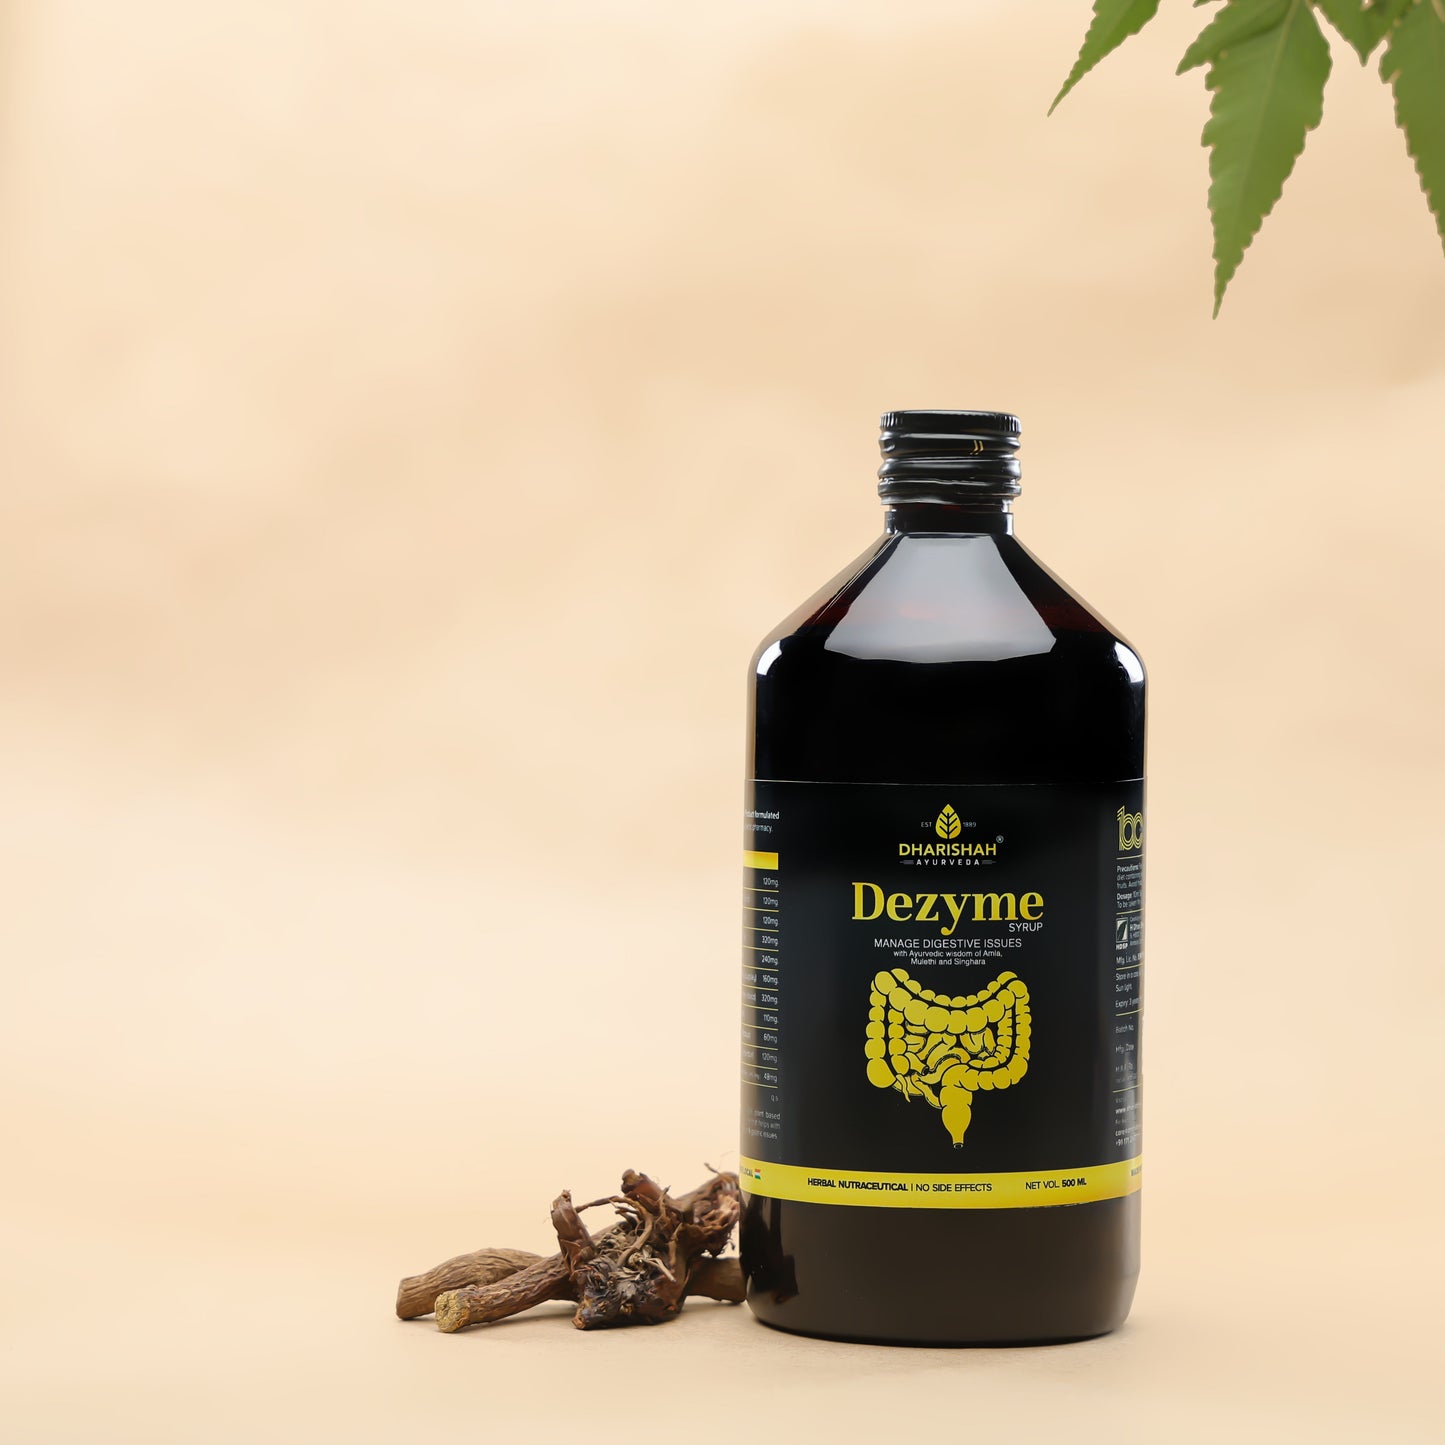 Dezyme Syrup